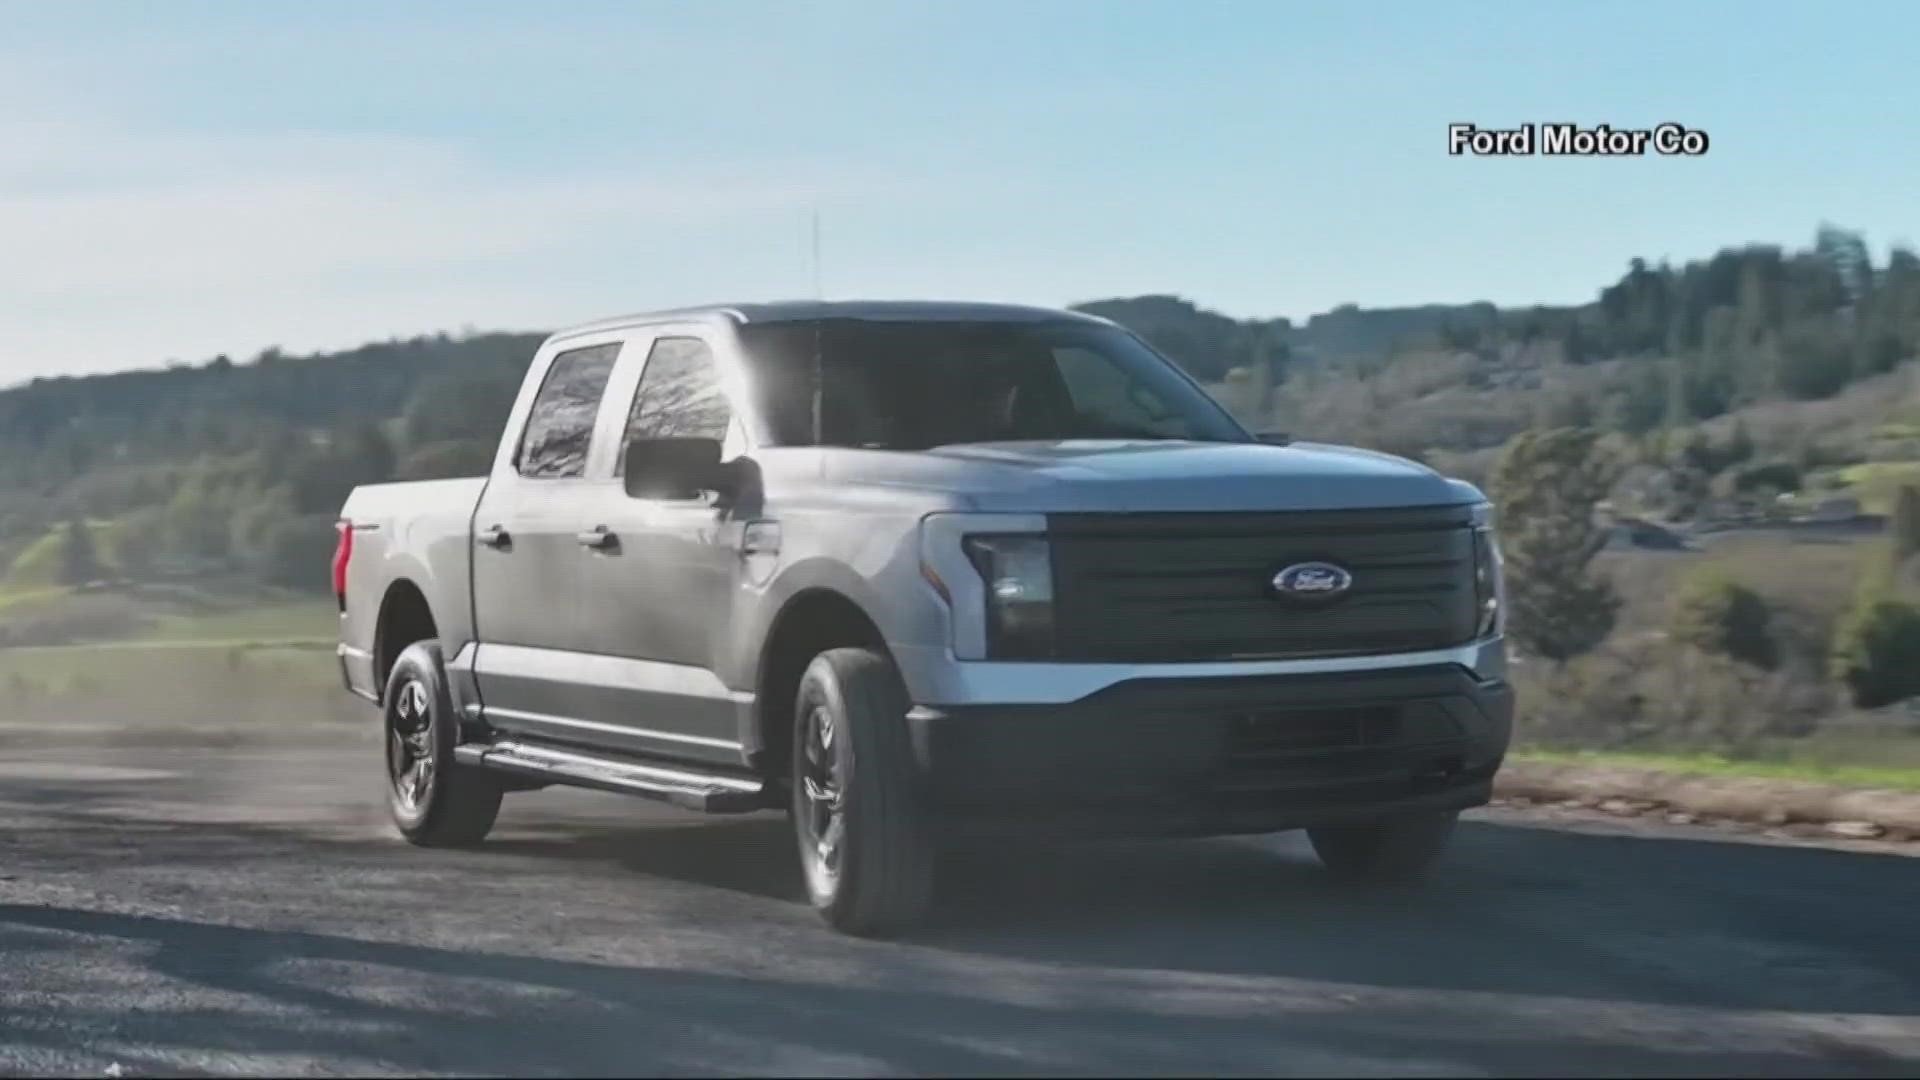 The EV maker said it would temporarily stop production and deliveries of its Endurance pickup truck due to performance and quality issues with some components.